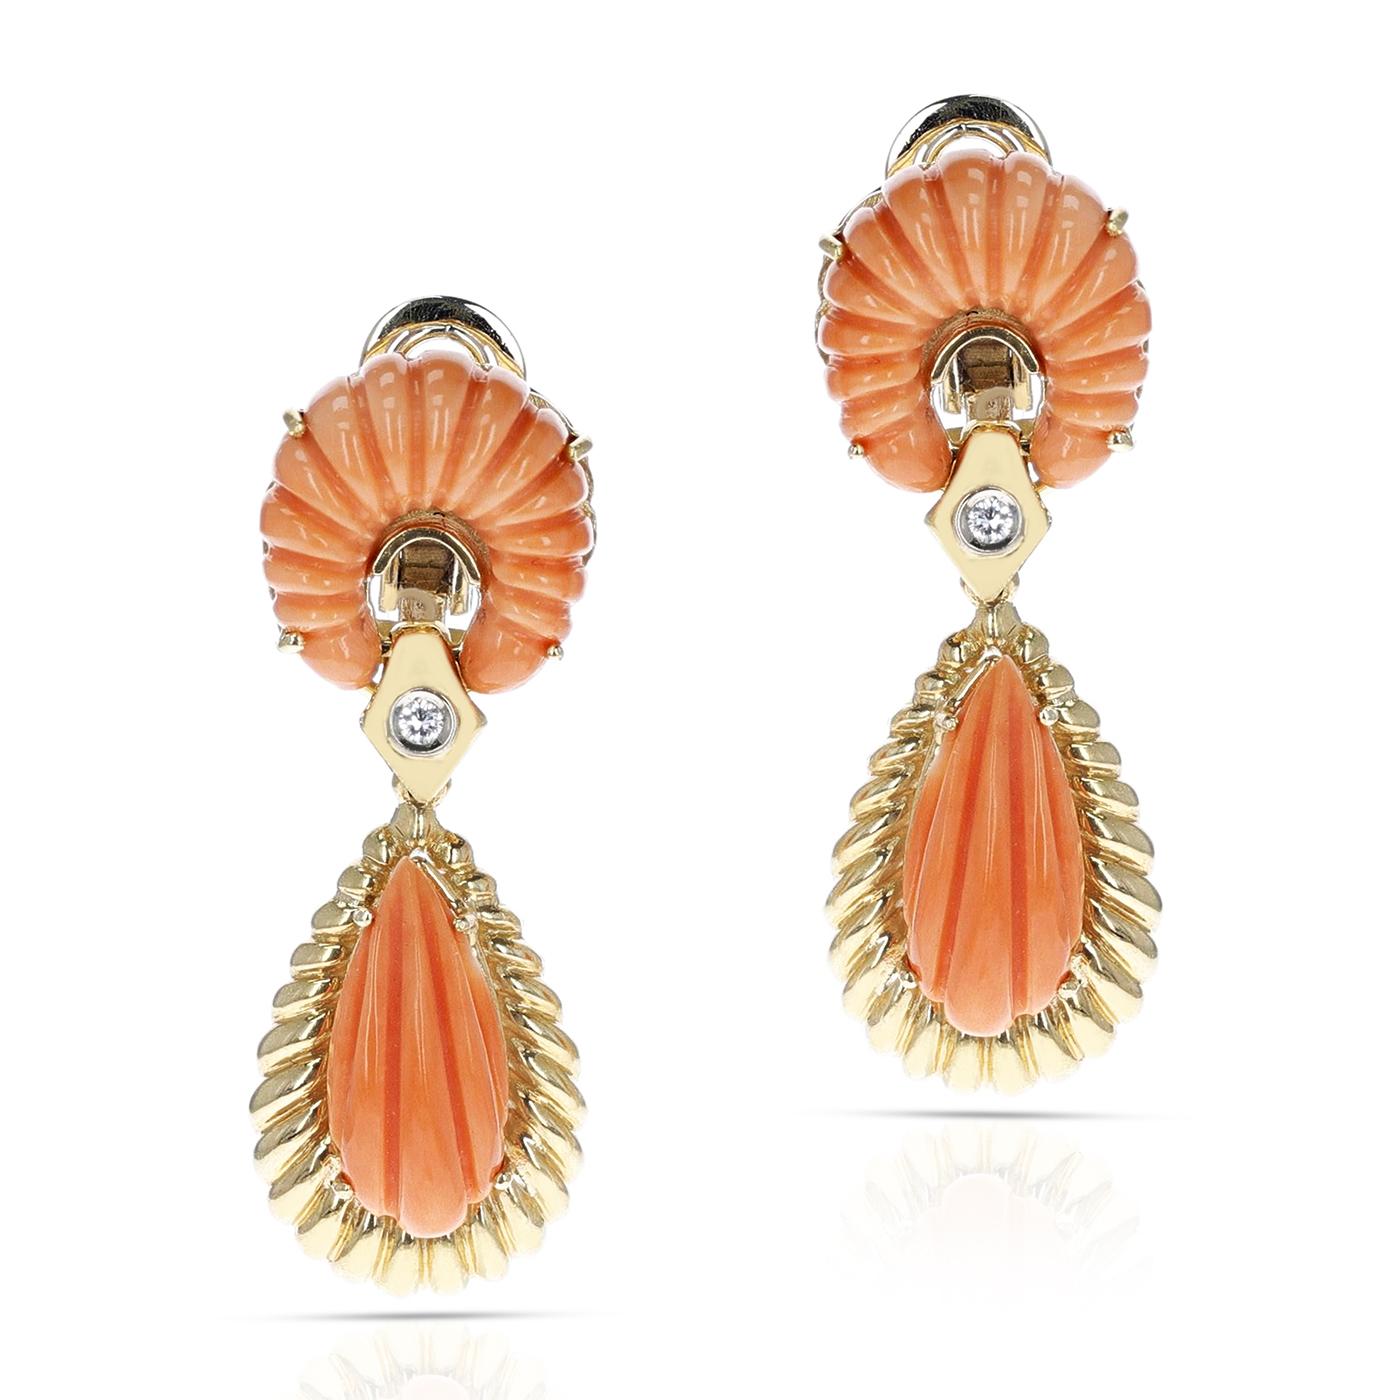 A pair of Van Cleef & Arpels Carved Coral Drop Earrings with a diamond, made in Italy. The earrings are made in 18 Karat Yellow Gold. The total weight of the earrings is 24.95 grams. The length of the earrings is 2 inches. 